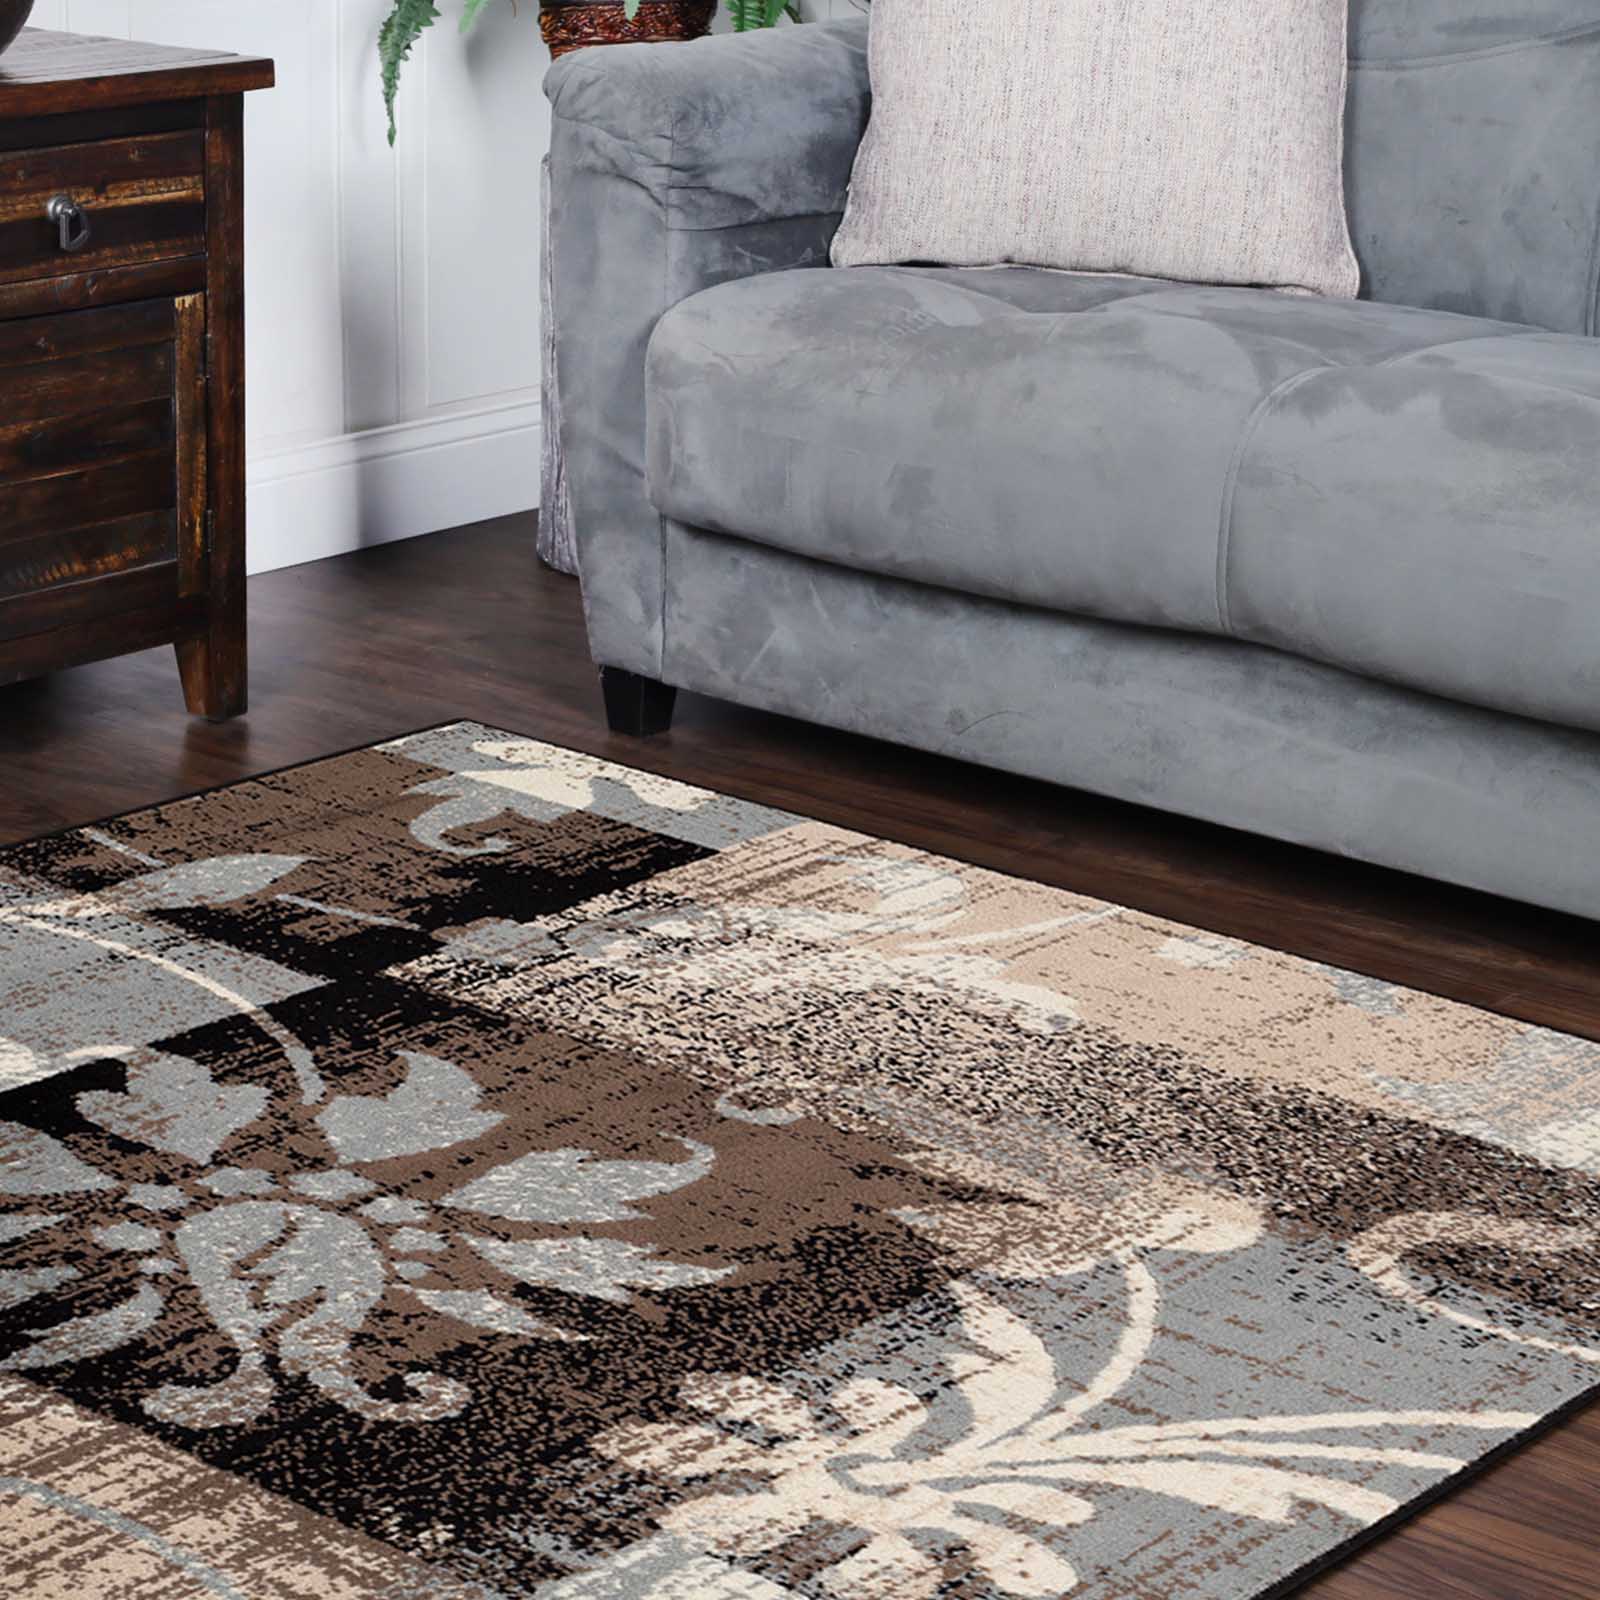 Superior Pastiche Contemporary Floral Patchwork Area Rug - Chocolate